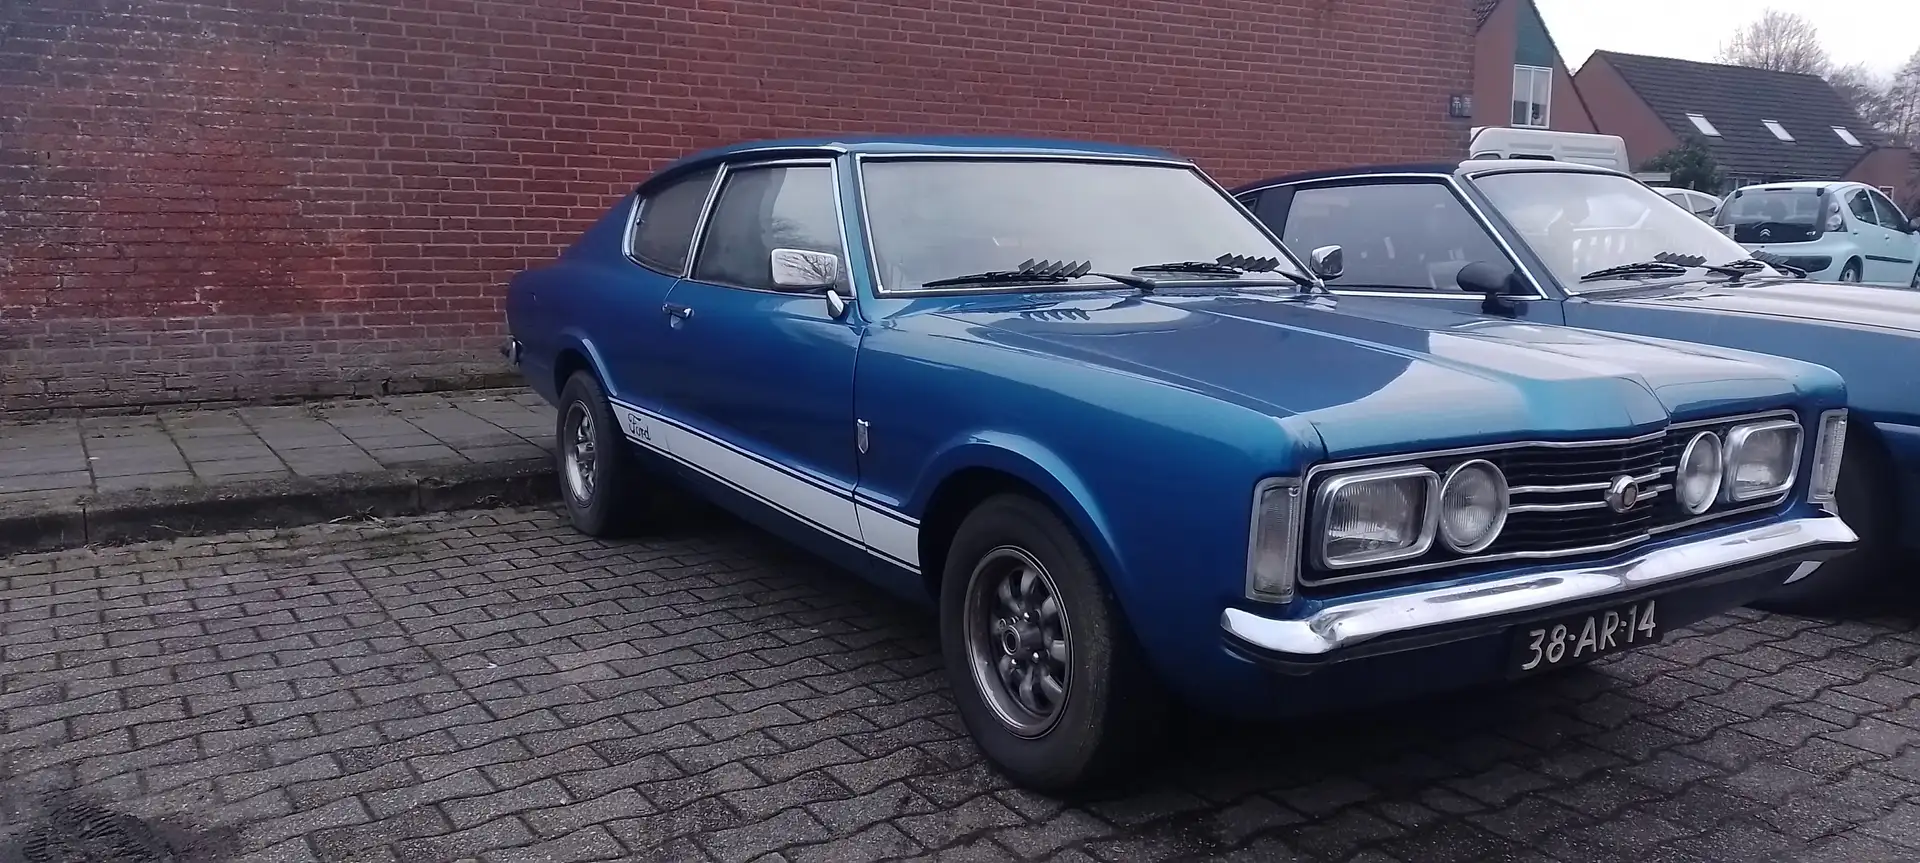 Ford Taunus xl automatic coupe Azul - 2